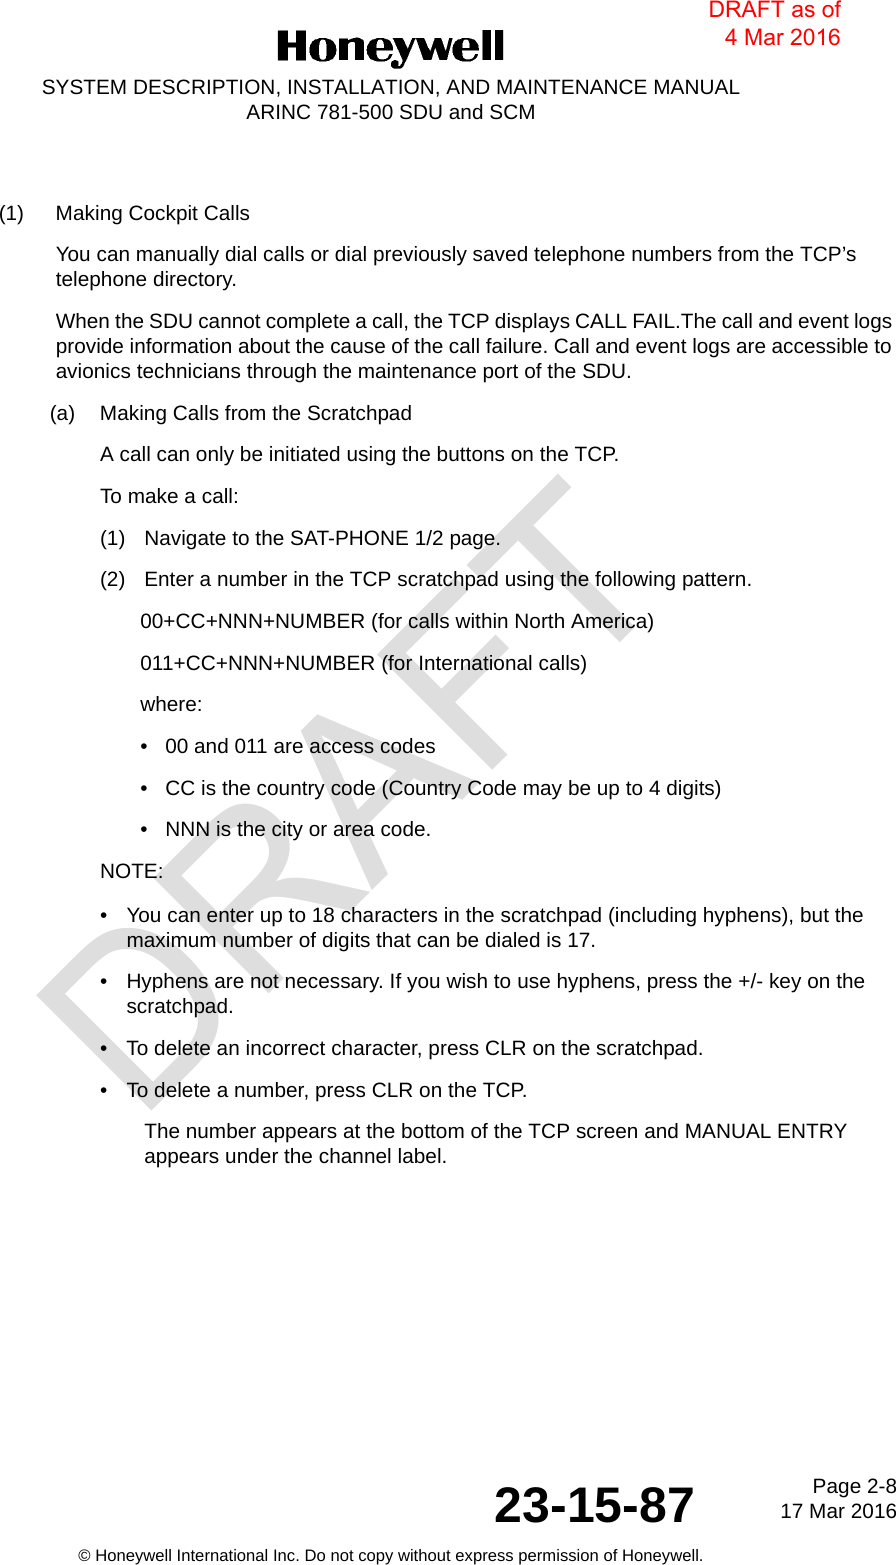 DRAFTPage 2-817 Mar 201623-15-87© Honeywell International Inc. Do not copy without express permission of Honeywell.SYSTEM DESCRIPTION, INSTALLATION, AND MAINTENANCE MANUALARINC 781-500 SDU and SCM(1) Making Cockpit CallsYou can manually dial calls or dial previously saved telephone numbers from the TCP’s telephone directory.When the SDU cannot complete a call, the TCP displays CALL FAIL.The call and event logs provide information about the cause of the call failure. Call and event logs are accessible to avionics technicians through the maintenance port of the SDU.(a) Making Calls from the ScratchpadA call can only be initiated using the buttons on the TCP.To make a call:(1) Navigate to the SAT-PHONE 1/2 page.(2) Enter a number in the TCP scratchpad using the following pattern.00+CC+NNN+NUMBER (for calls within North America)011+CC+NNN+NUMBER (for International calls)where:• 00 and 011 are access codes• CC is the country code (Country Code may be up to 4 digits)• NNN is the city or area code.NOTE:• You can enter up to 18 characters in the scratchpad (including hyphens), but the maximum number of digits that can be dialed is 17.• Hyphens are not necessary. If you wish to use hyphens, press the +/- key on the scratchpad.• To delete an incorrect character, press CLR on the scratchpad.• To delete a number, press CLR on the TCP.The number appears at the bottom of the TCP screen and MANUAL ENTRY appears under the channel label.DRAFT as of 4 Mar 2016